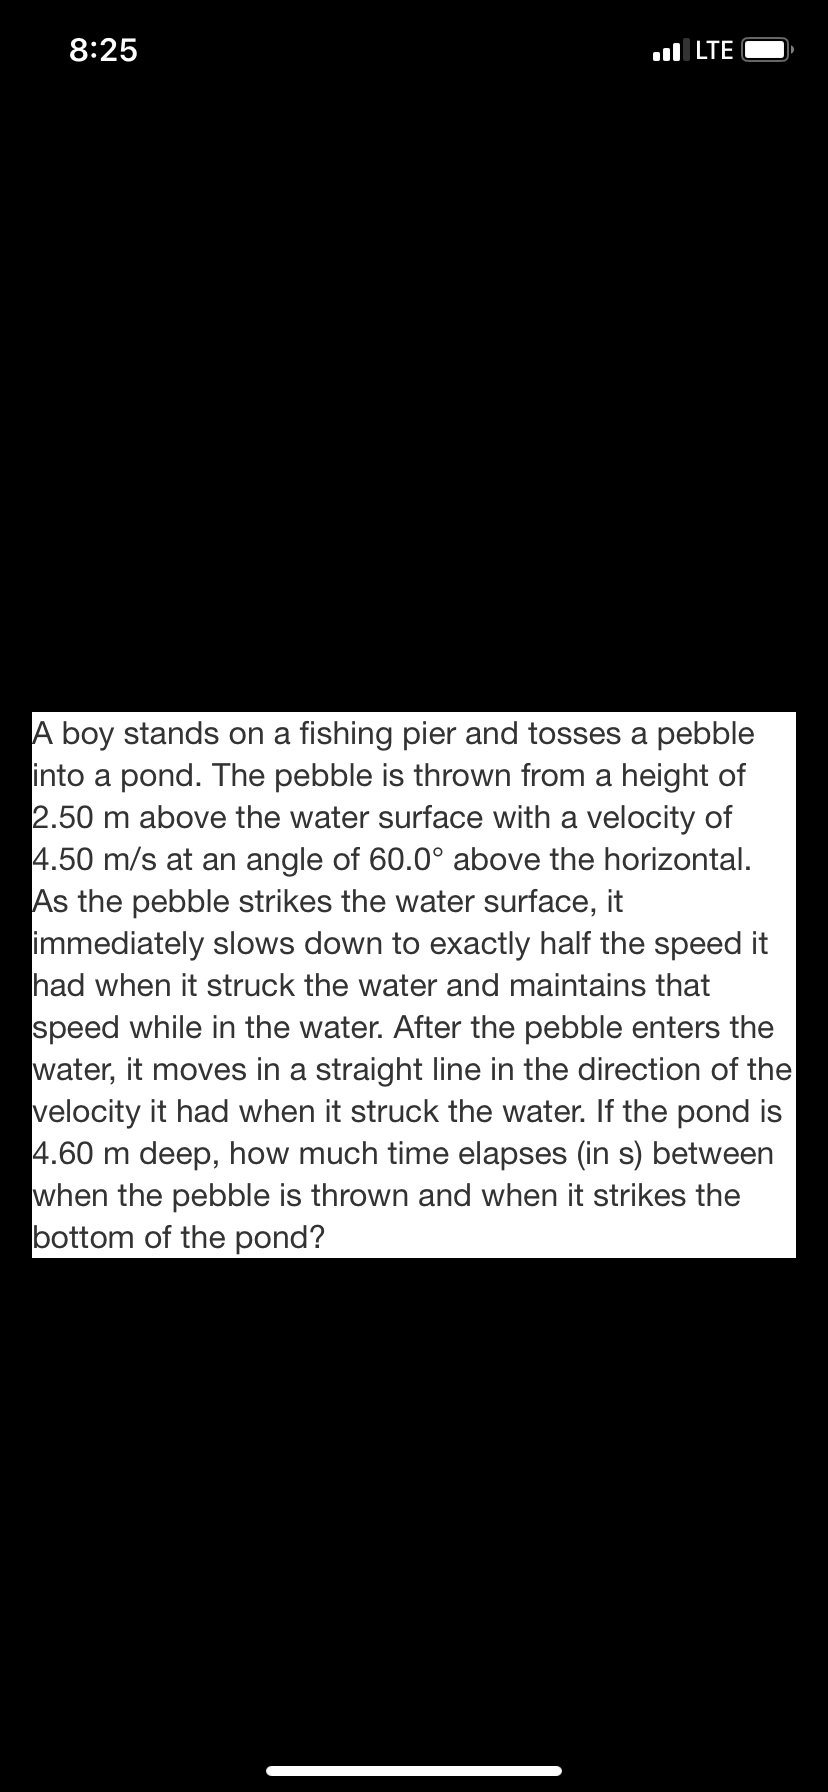 A boy stands on a fishing pier and tosses a pebble
into a pond. The pebble is thrown from a height of
2.50 m above the water surface with a velocity of
4.50 m/s at an angle of 60.0° above the horizontal.
As the pebble strikes the water surface, it
immediately slows down to exactly half the speed it
had when it struck the water and maintains that
speed while in the water. After the pebble enters the
water, it moves in a straight line in the direction of the
velocity it had when it struck the water. If the pond is
4.60 m deep, how much time elapses (in s) between
when the pebble is thrown and when it strikes the
bottom of the pond?
